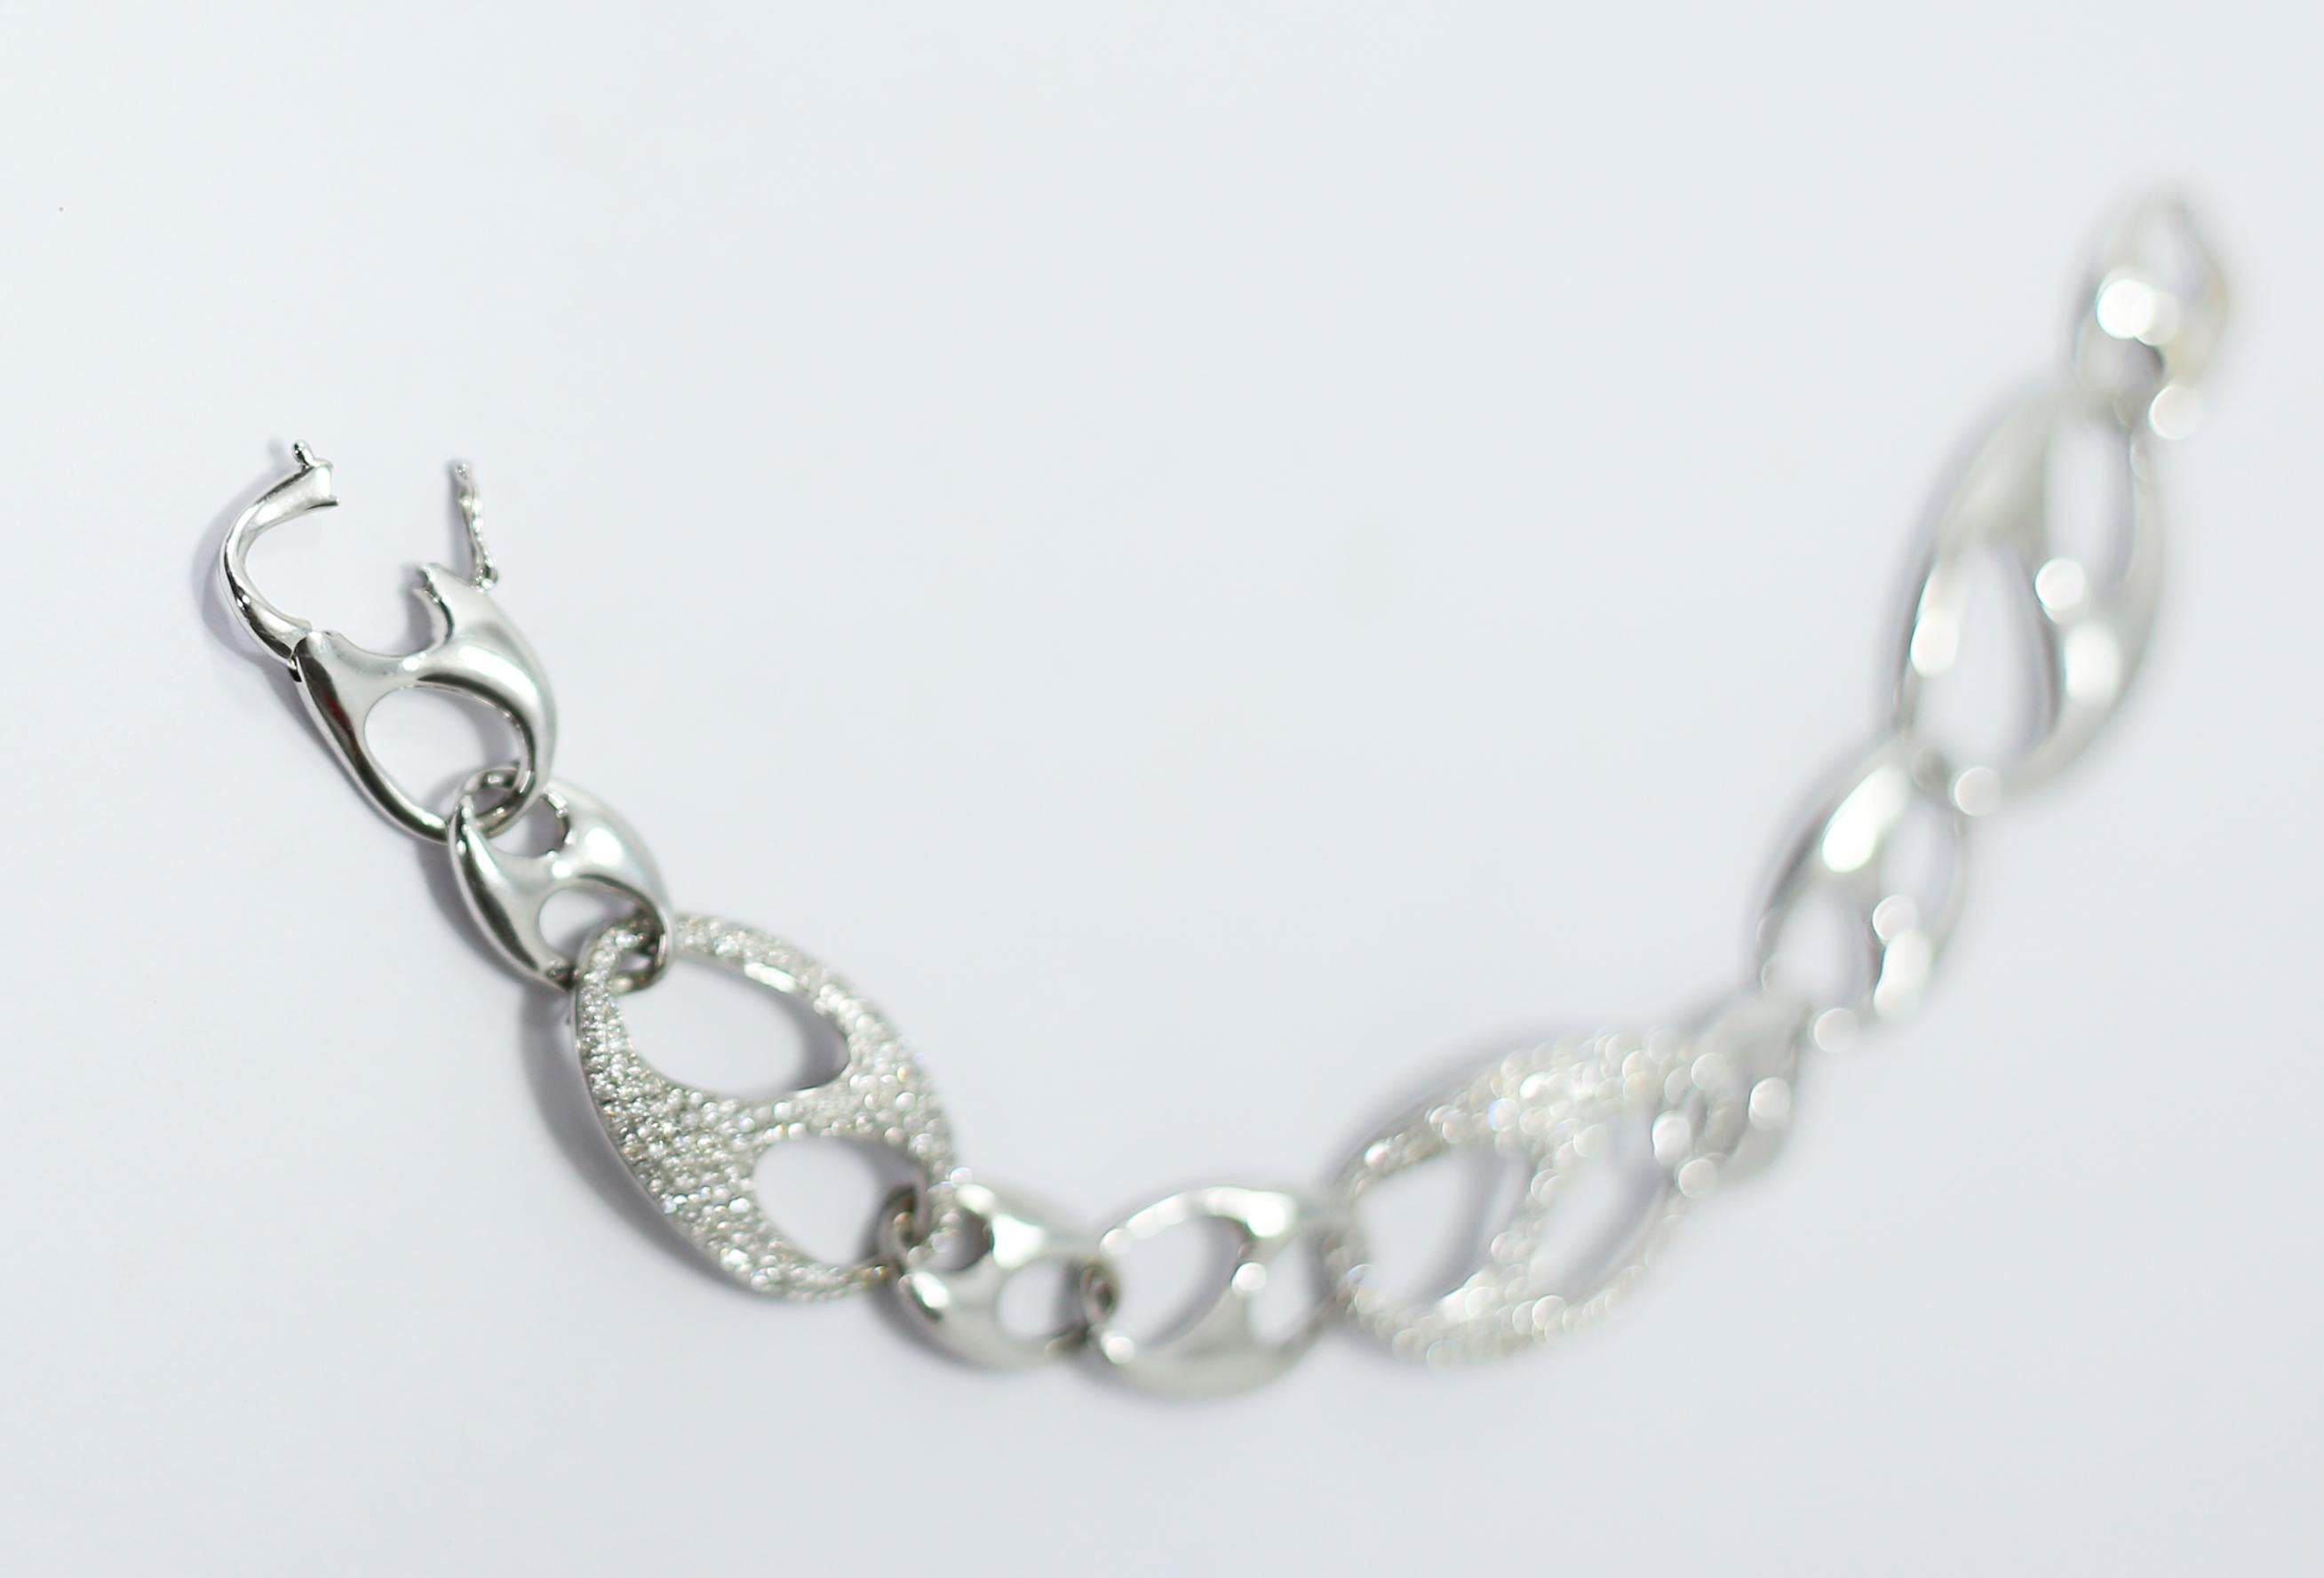 Brilliant Cut Nautical Anchor Link Bracelet 18k White Gold and 1.5 Carat of White Diamonds For Sale